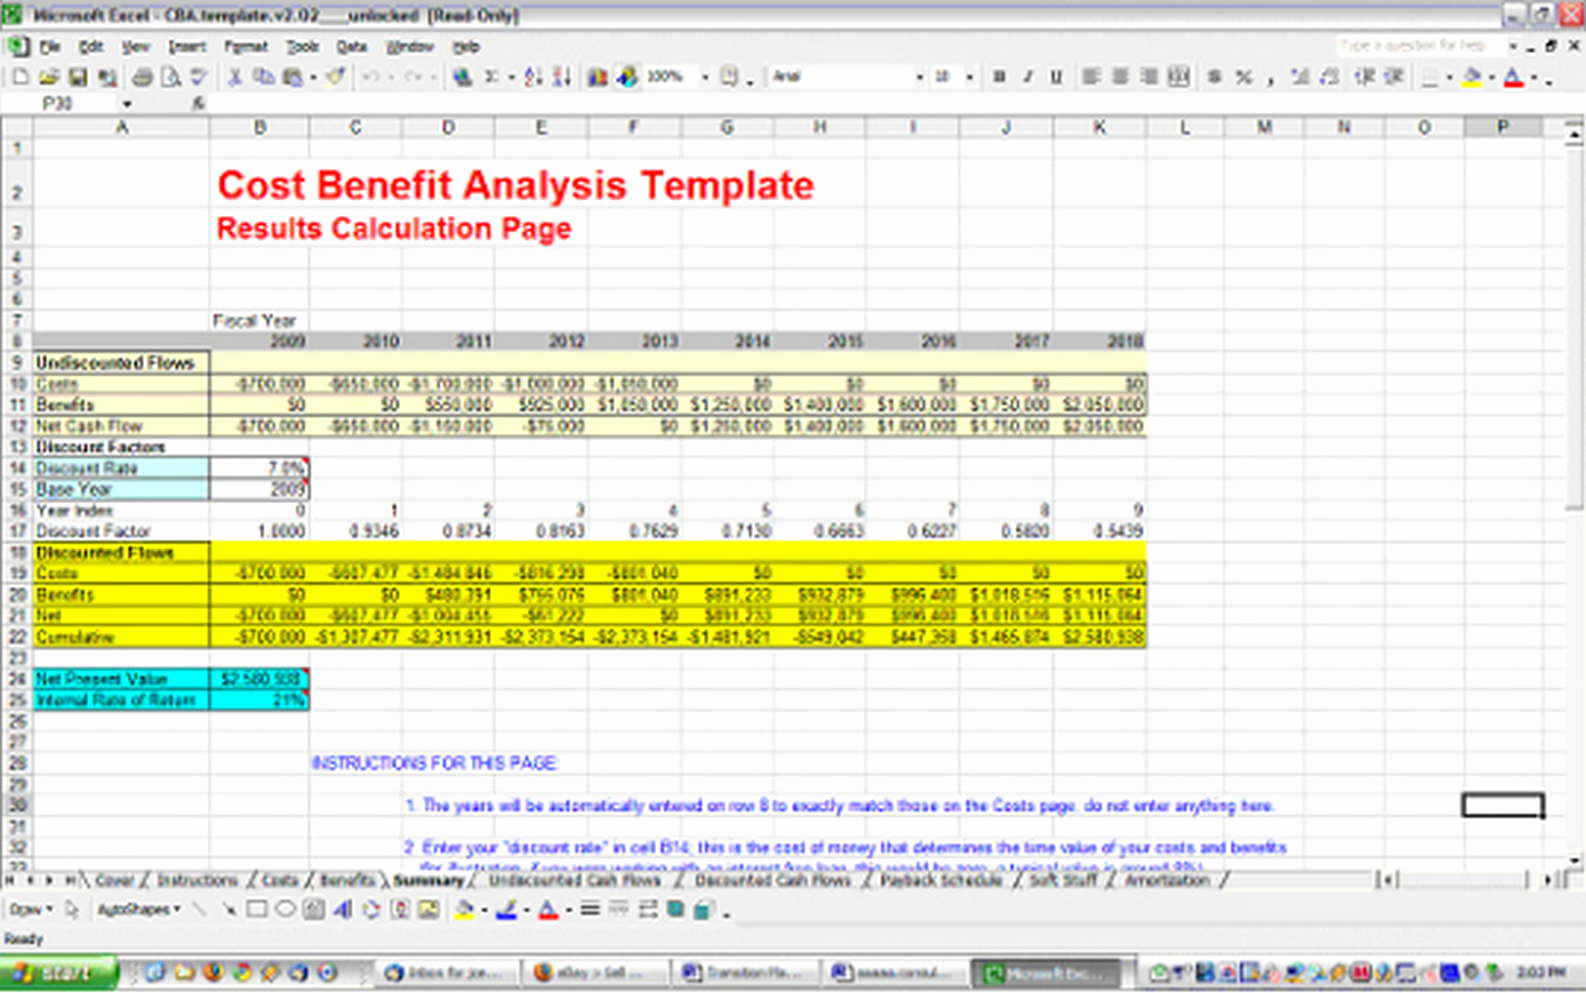 Cost Benefit Analysis Template Excel Lovely Cost Benefit Analysis Template